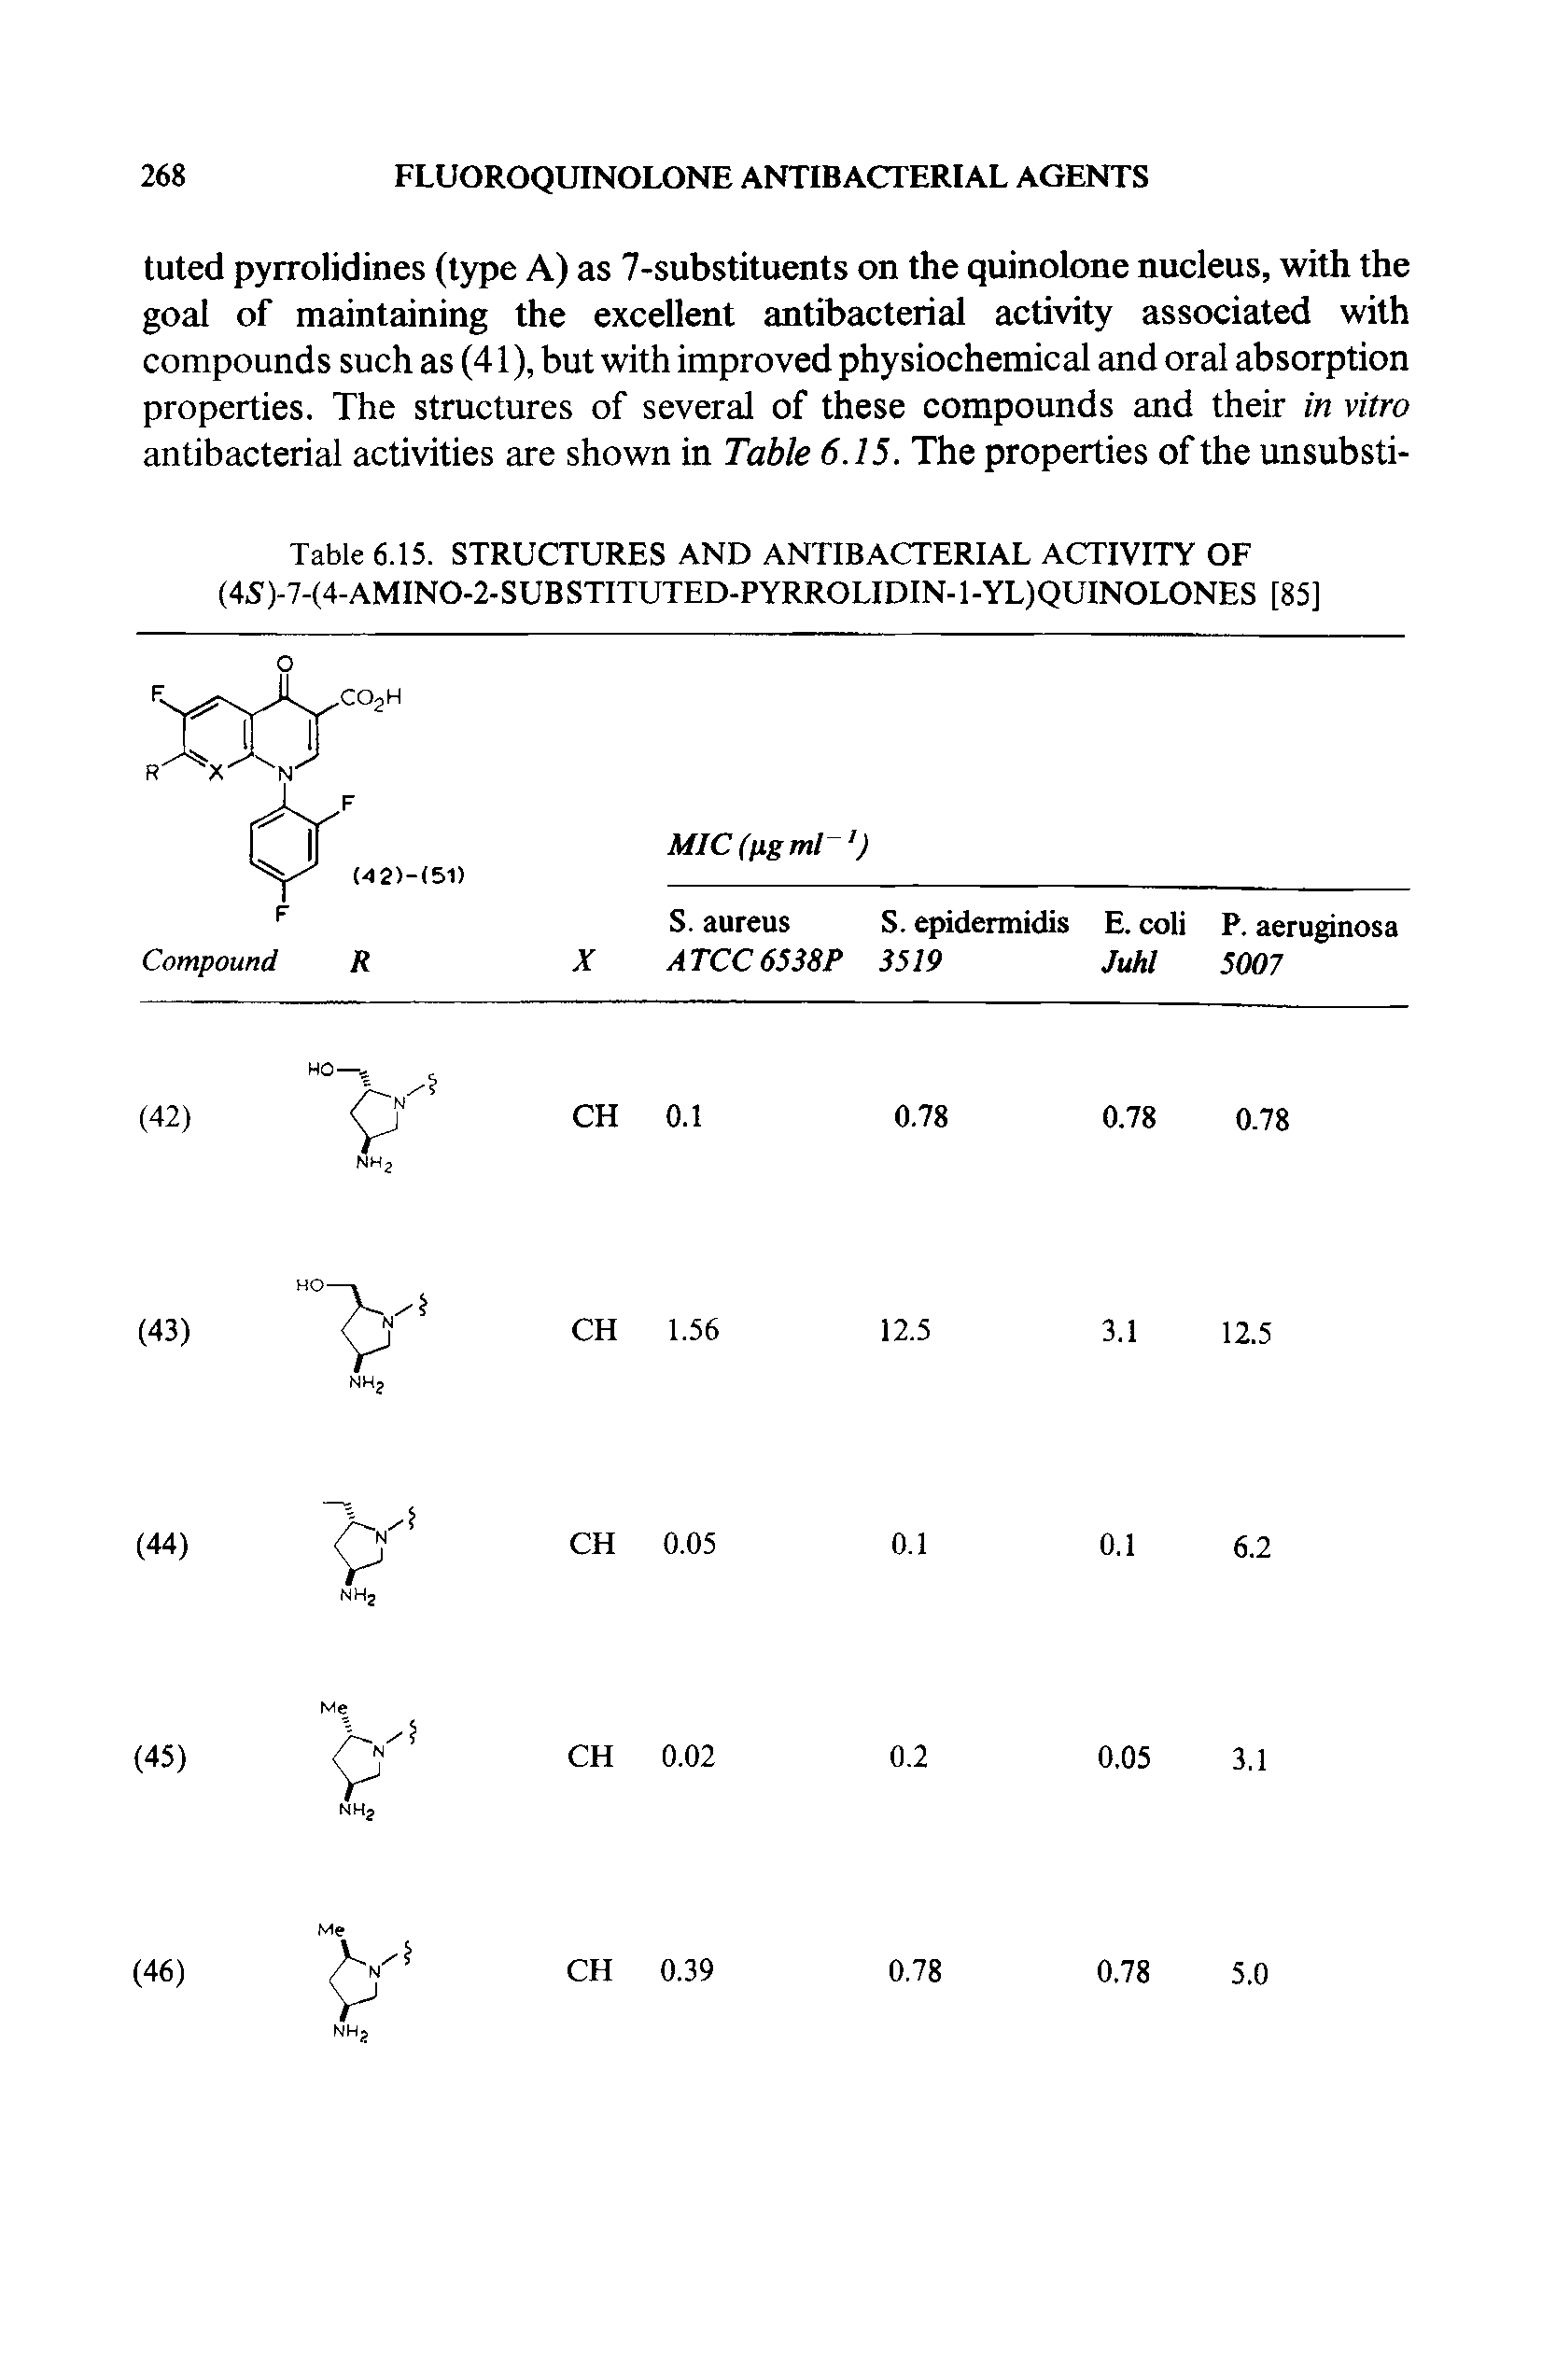 Table 6.15. STRUCTURES AND ANTIBACTERIAL ACTIVITY OF (45)-7-(4-AMINO-2-SUBSTITUTED-PYRROLIDIN-l-YL)QUINOLONES [85]...